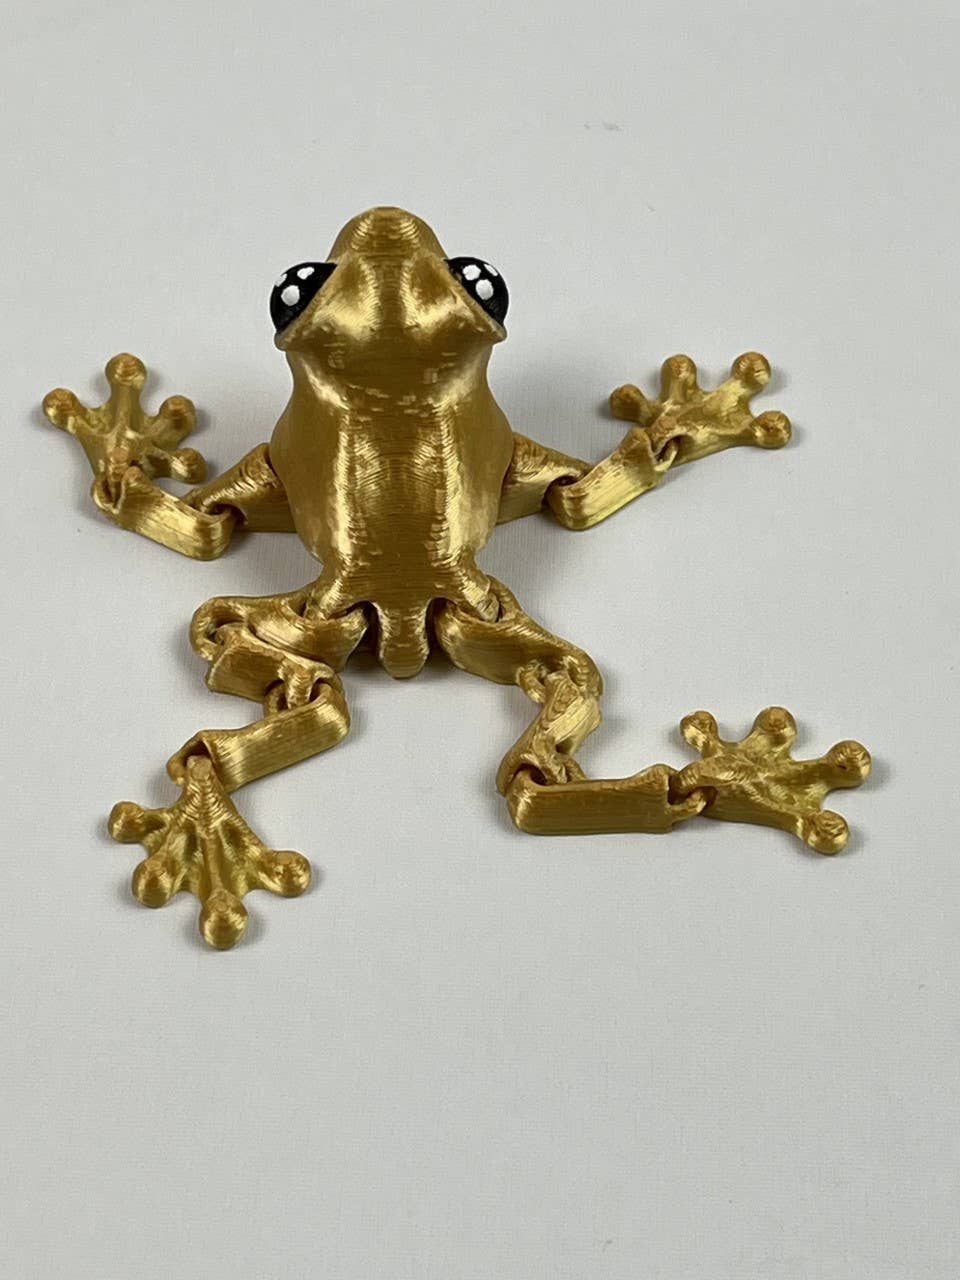 3D Printed Frogs